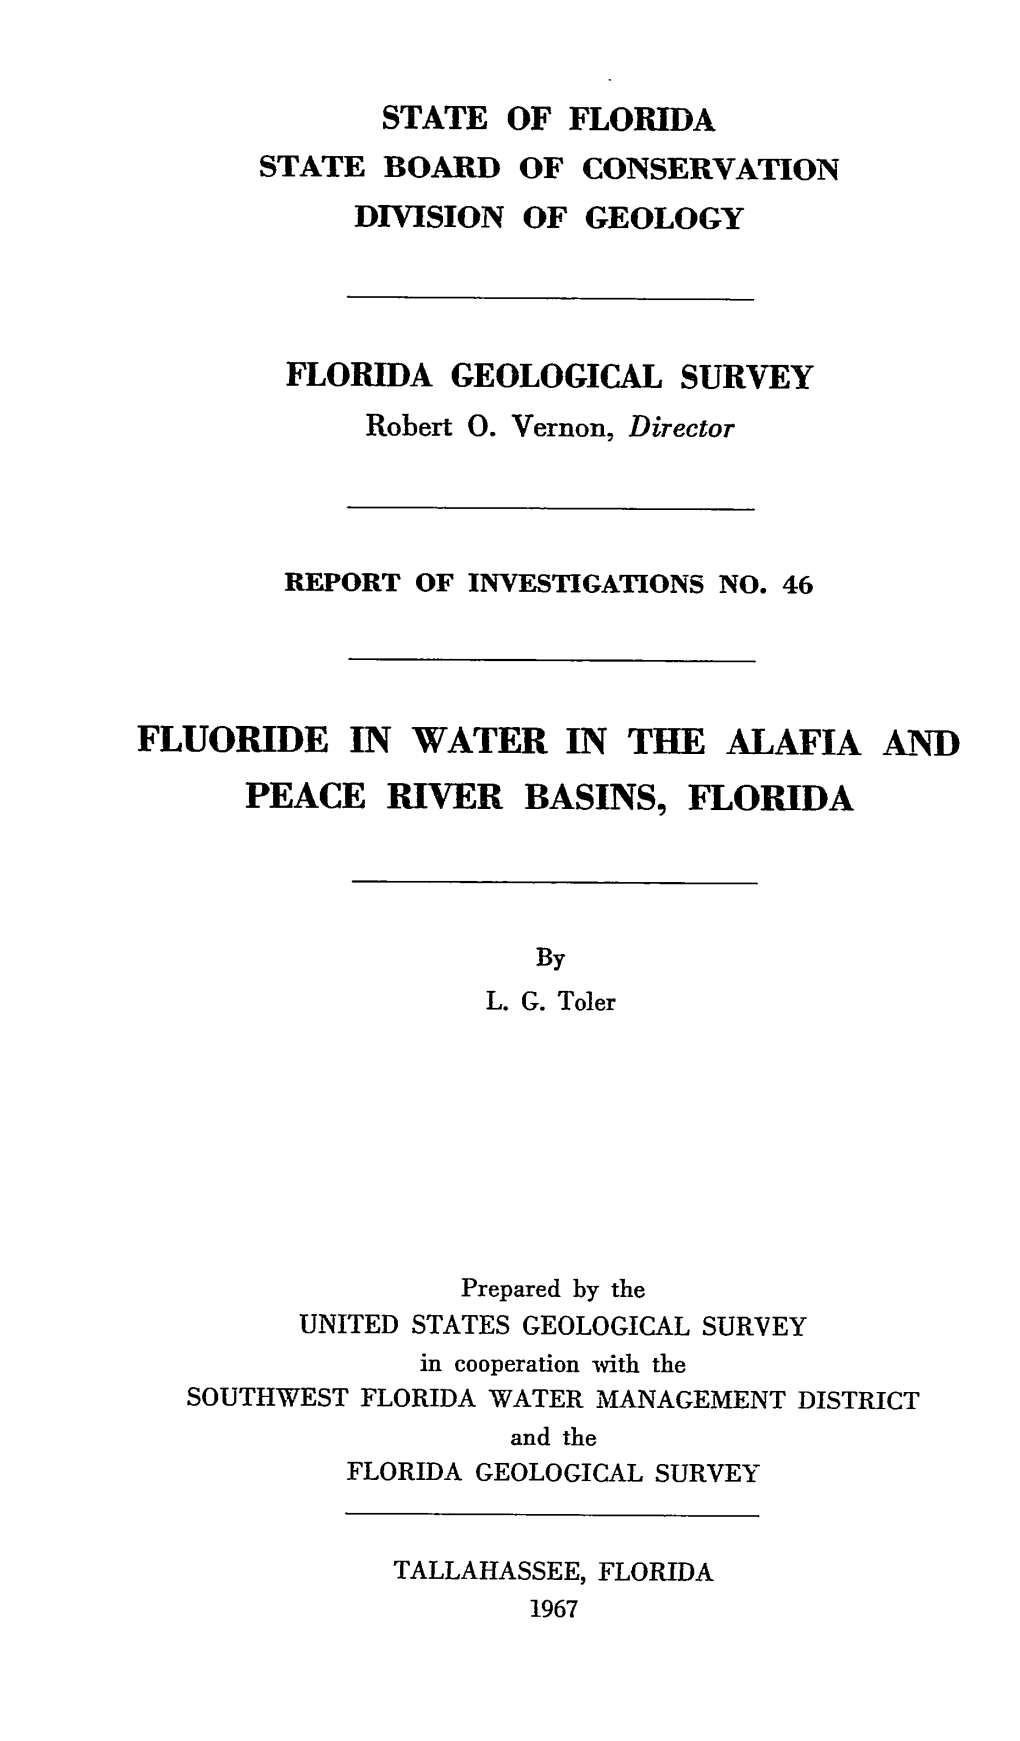 Fluoride in Water in the Alafia and Peace River Basins, Florida